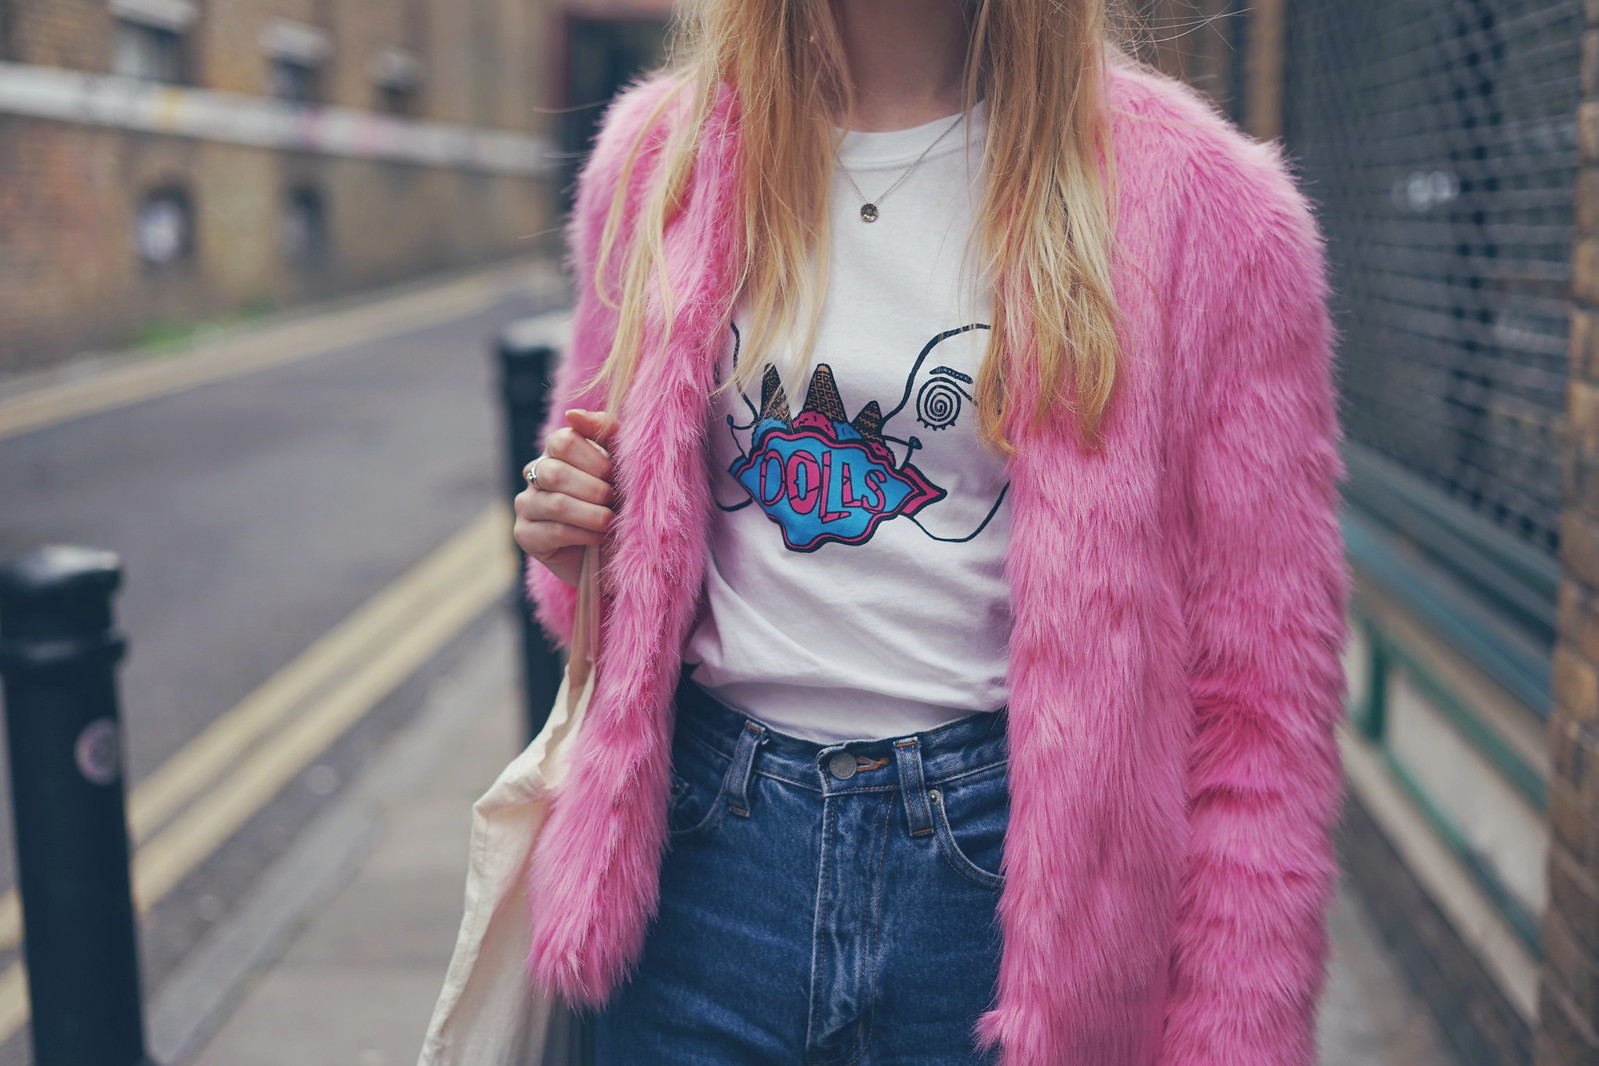 A band tee and a faux fur coat